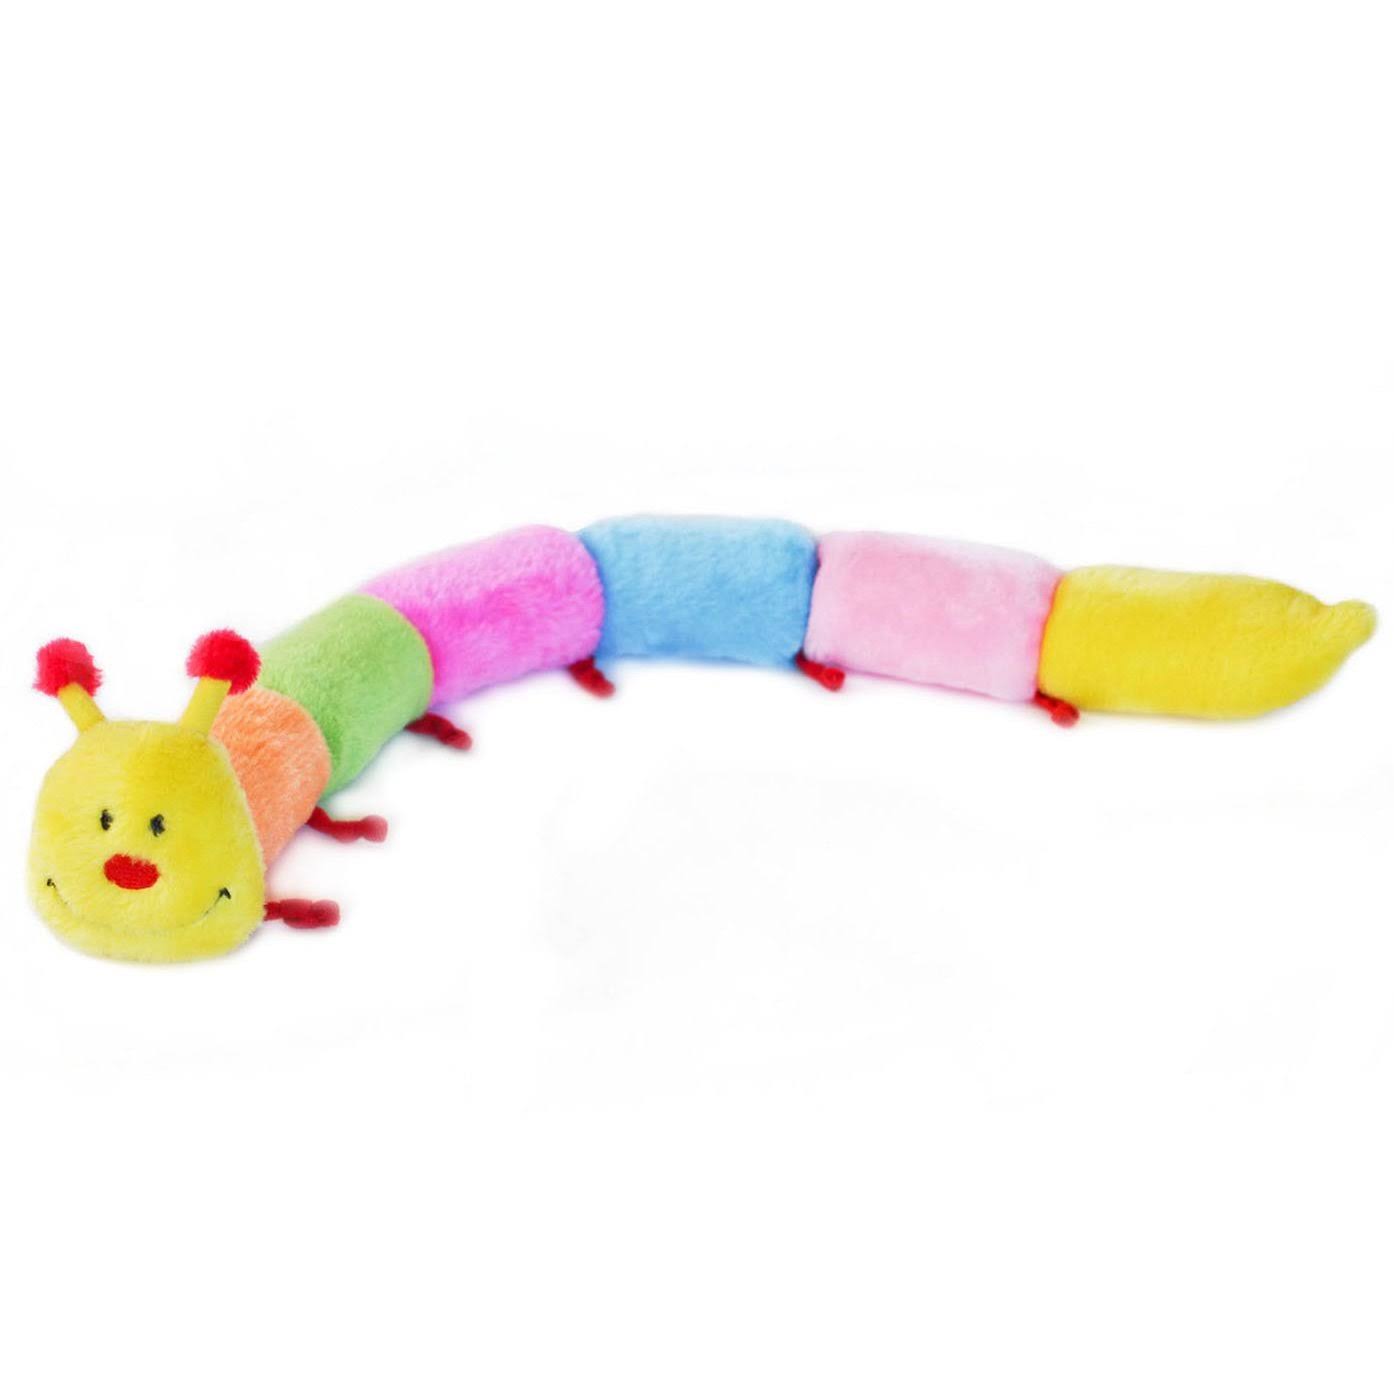 ZippyPaws Caterpillar Deluxe Plush Dog Toy - with 6 Blaster Squeakers, No Stuffing